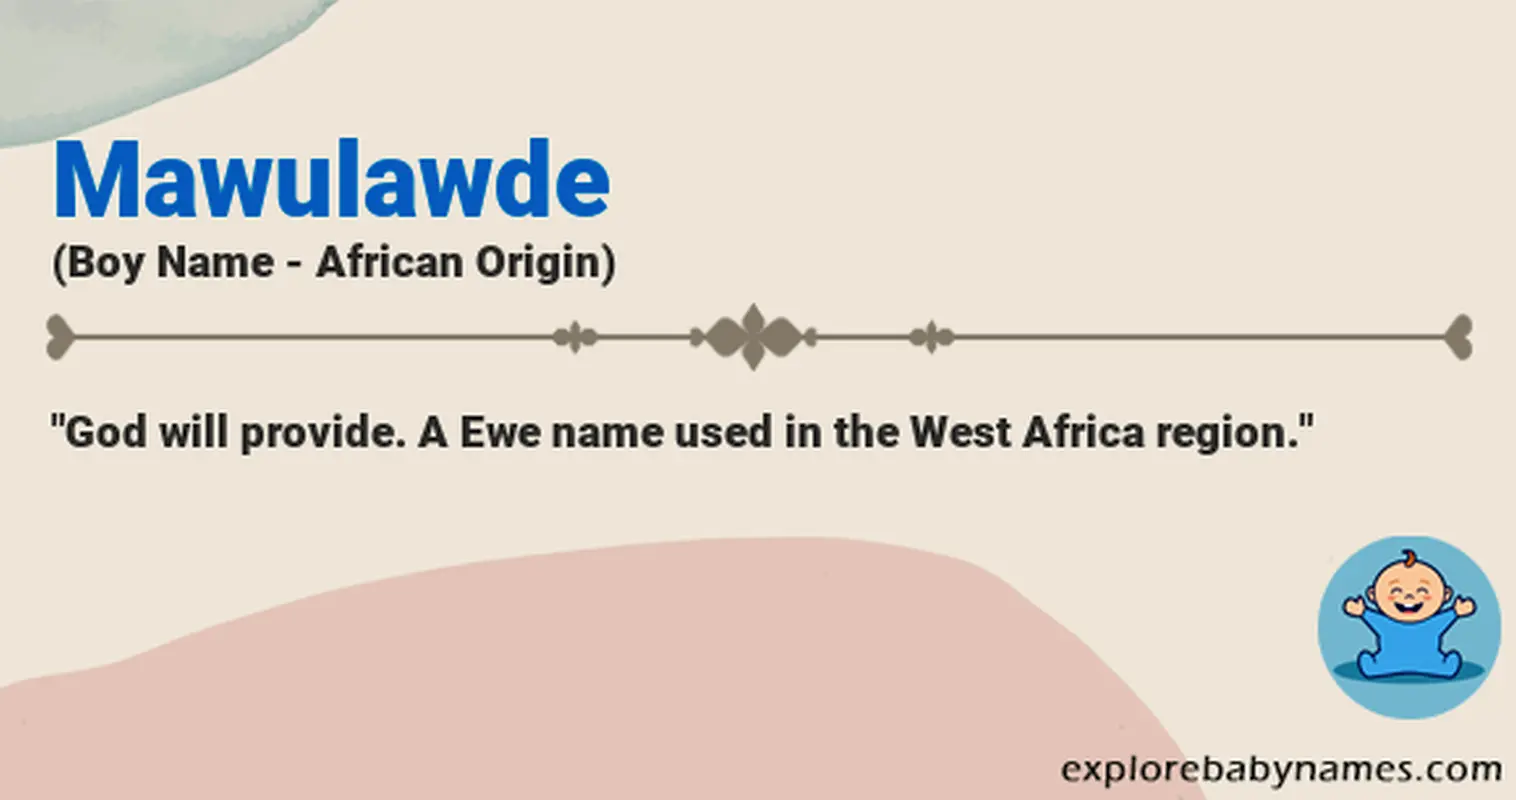 Meaning of Mawulawde